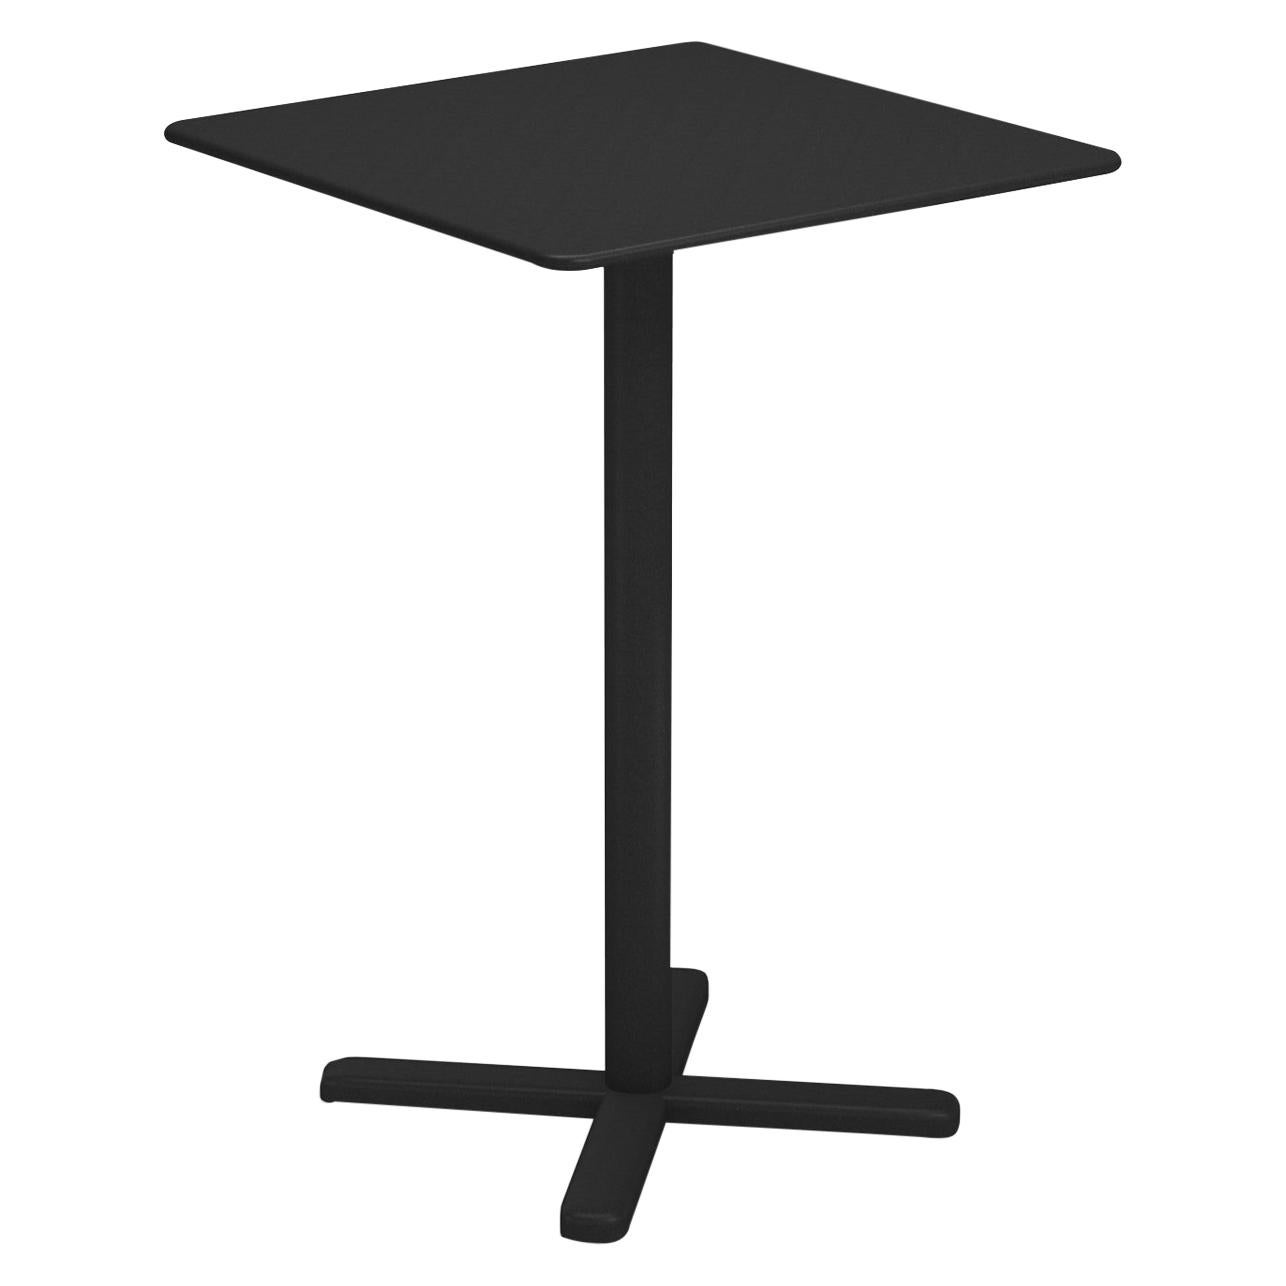 Steel EMU Darwin 2 Seats Collapsible High Table For Sale